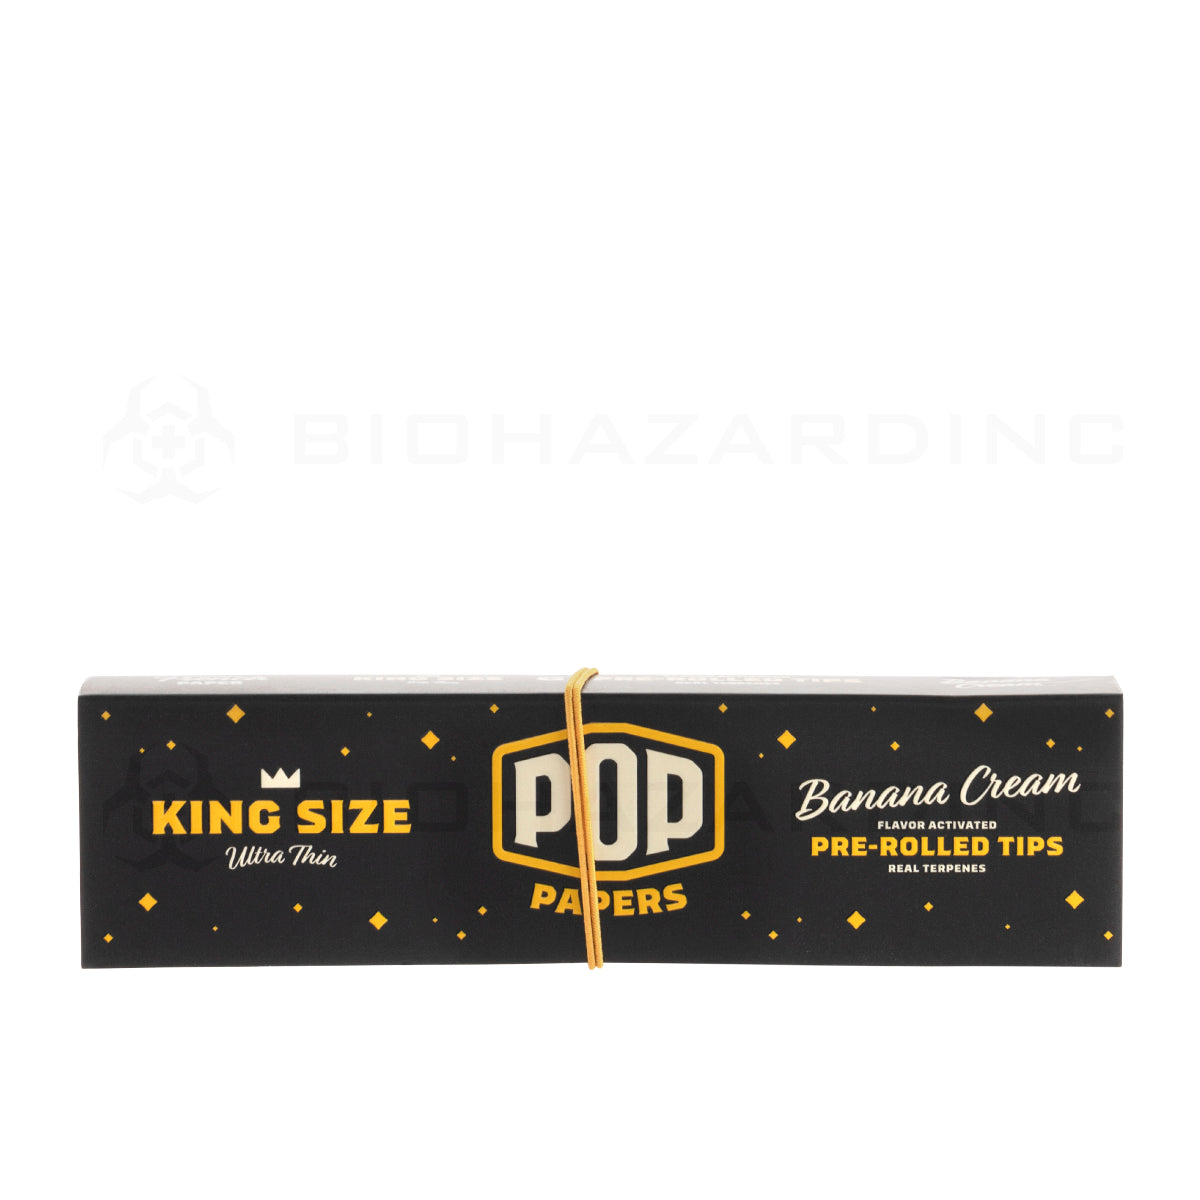 Pop Papers | Wholesale Ultra Thin King Size Rolling Paper w/ Flavor Filter Tips | 110mm - 24 Count - Various Flavors Rolling Papers Biohazard Inc   